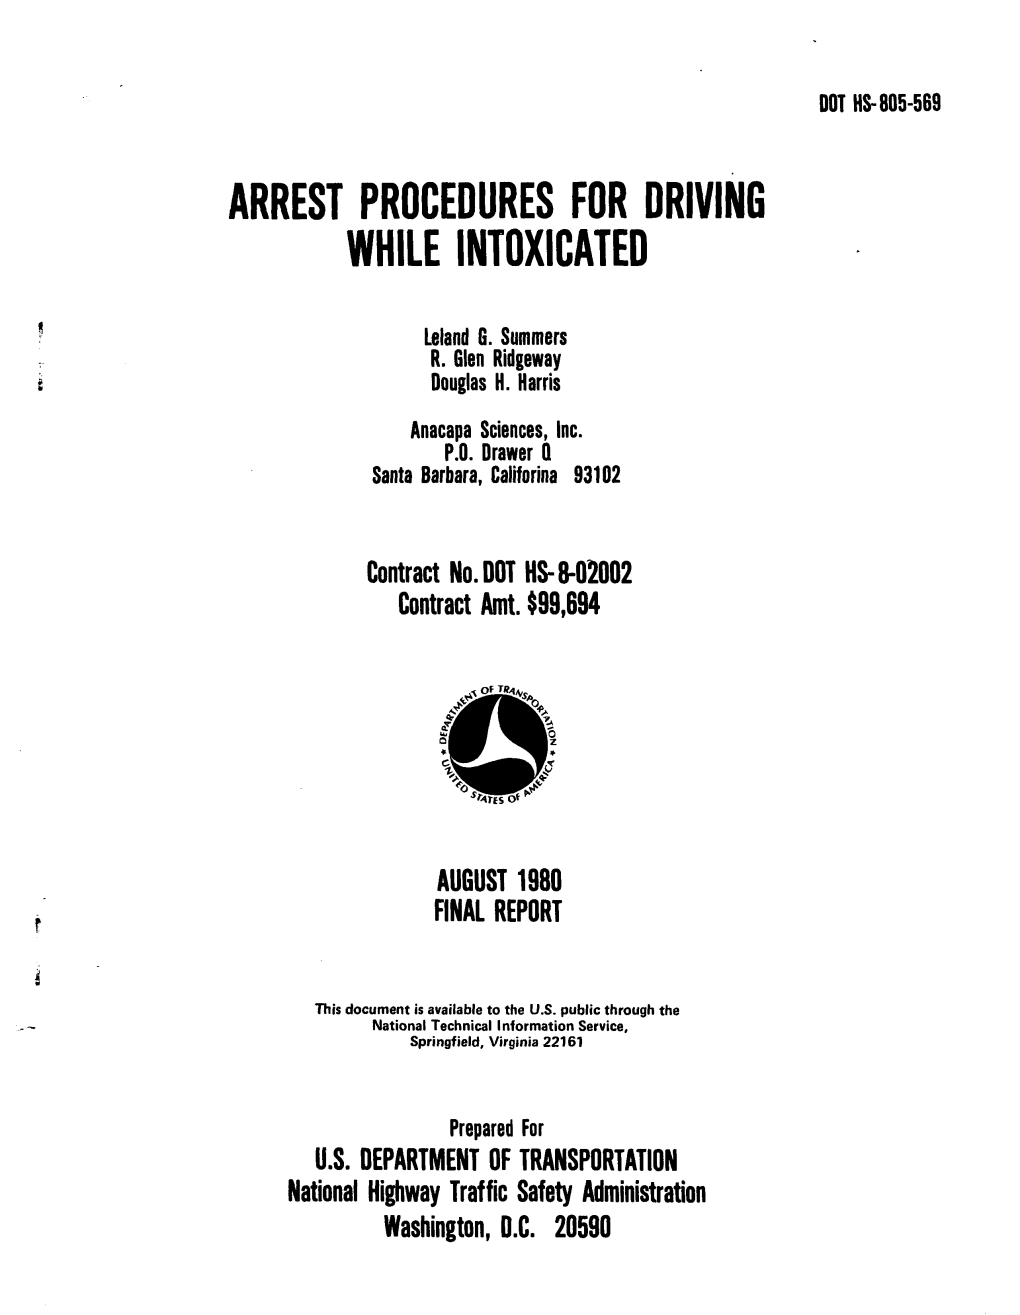 Arrest Procedures for Driving While Intoxicated